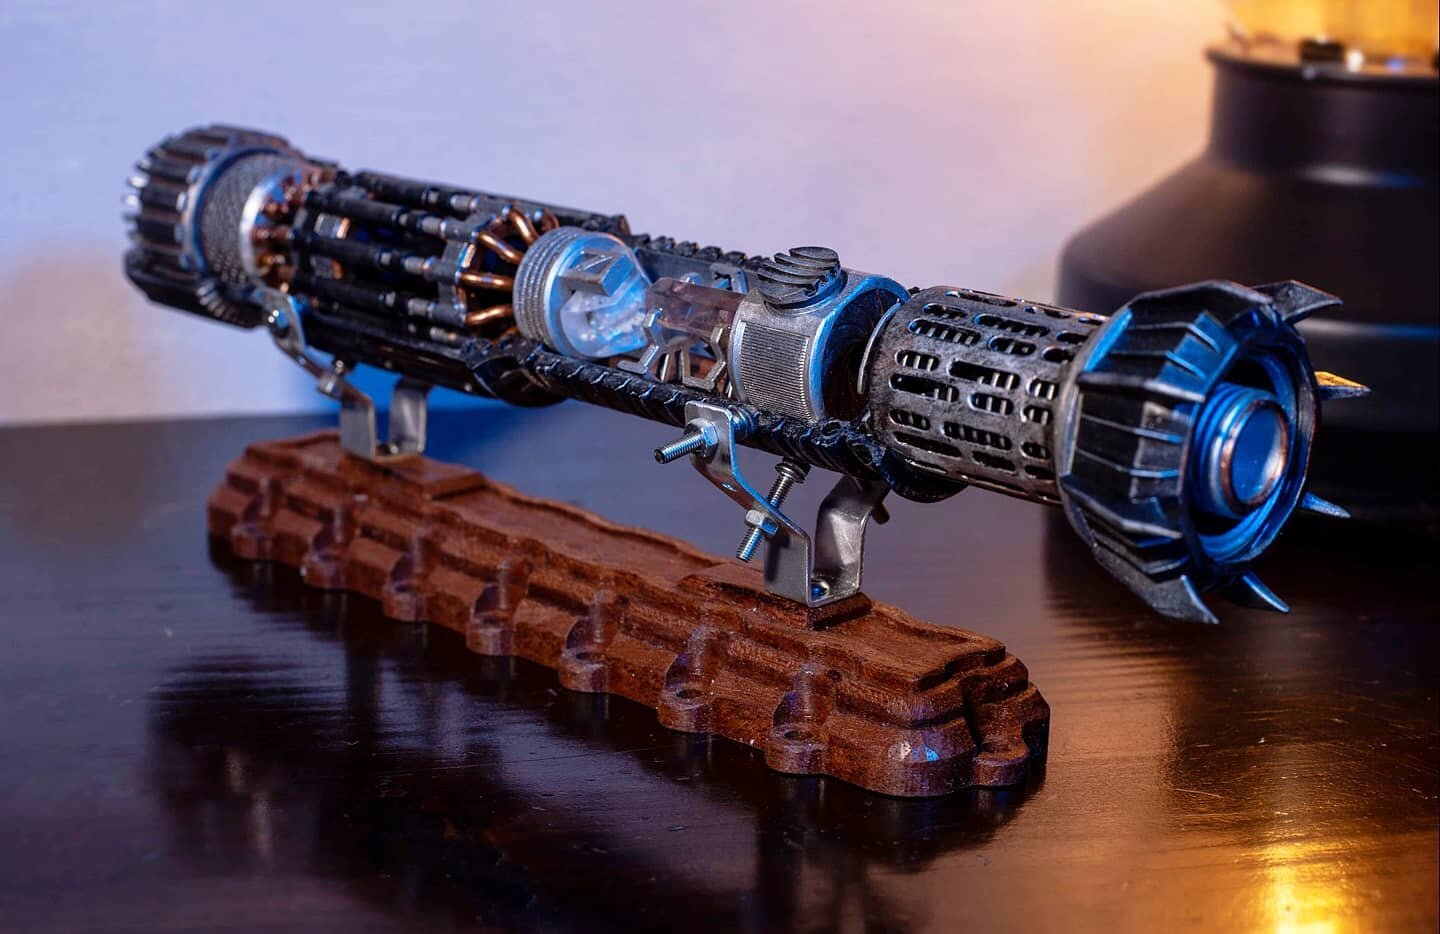 This was my first fully 3d prined project. Designed by the amazing @cworthdynamics and printed on a @elegoo.official Mars resin printer. This light sabre was so much fun and I learnt a huge amount about printing while constructing the model. There's 